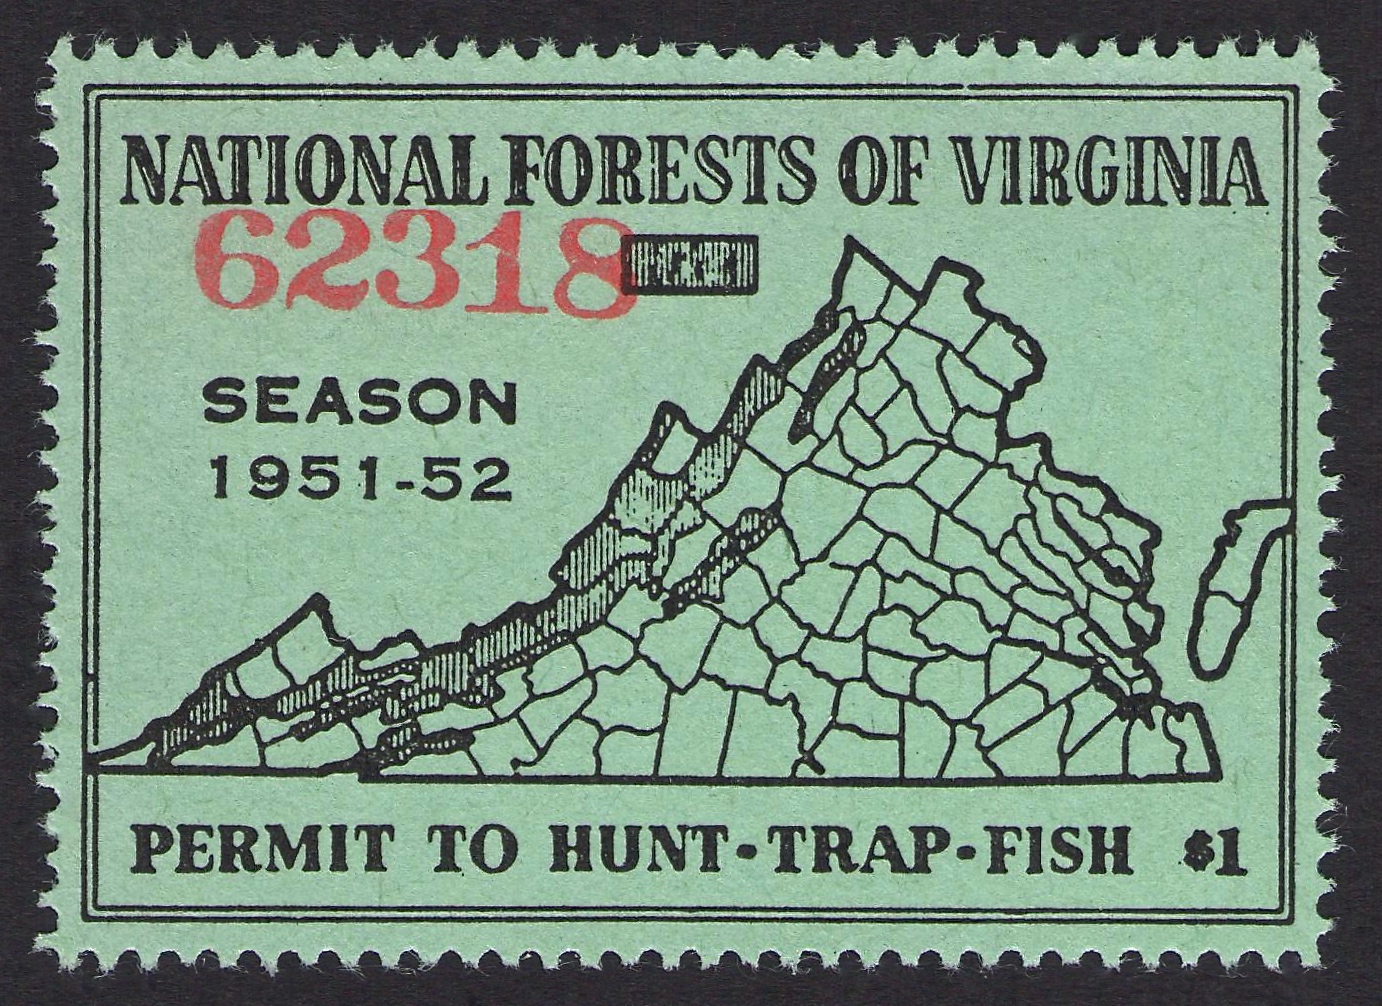 1951-52 National Forest Virginia